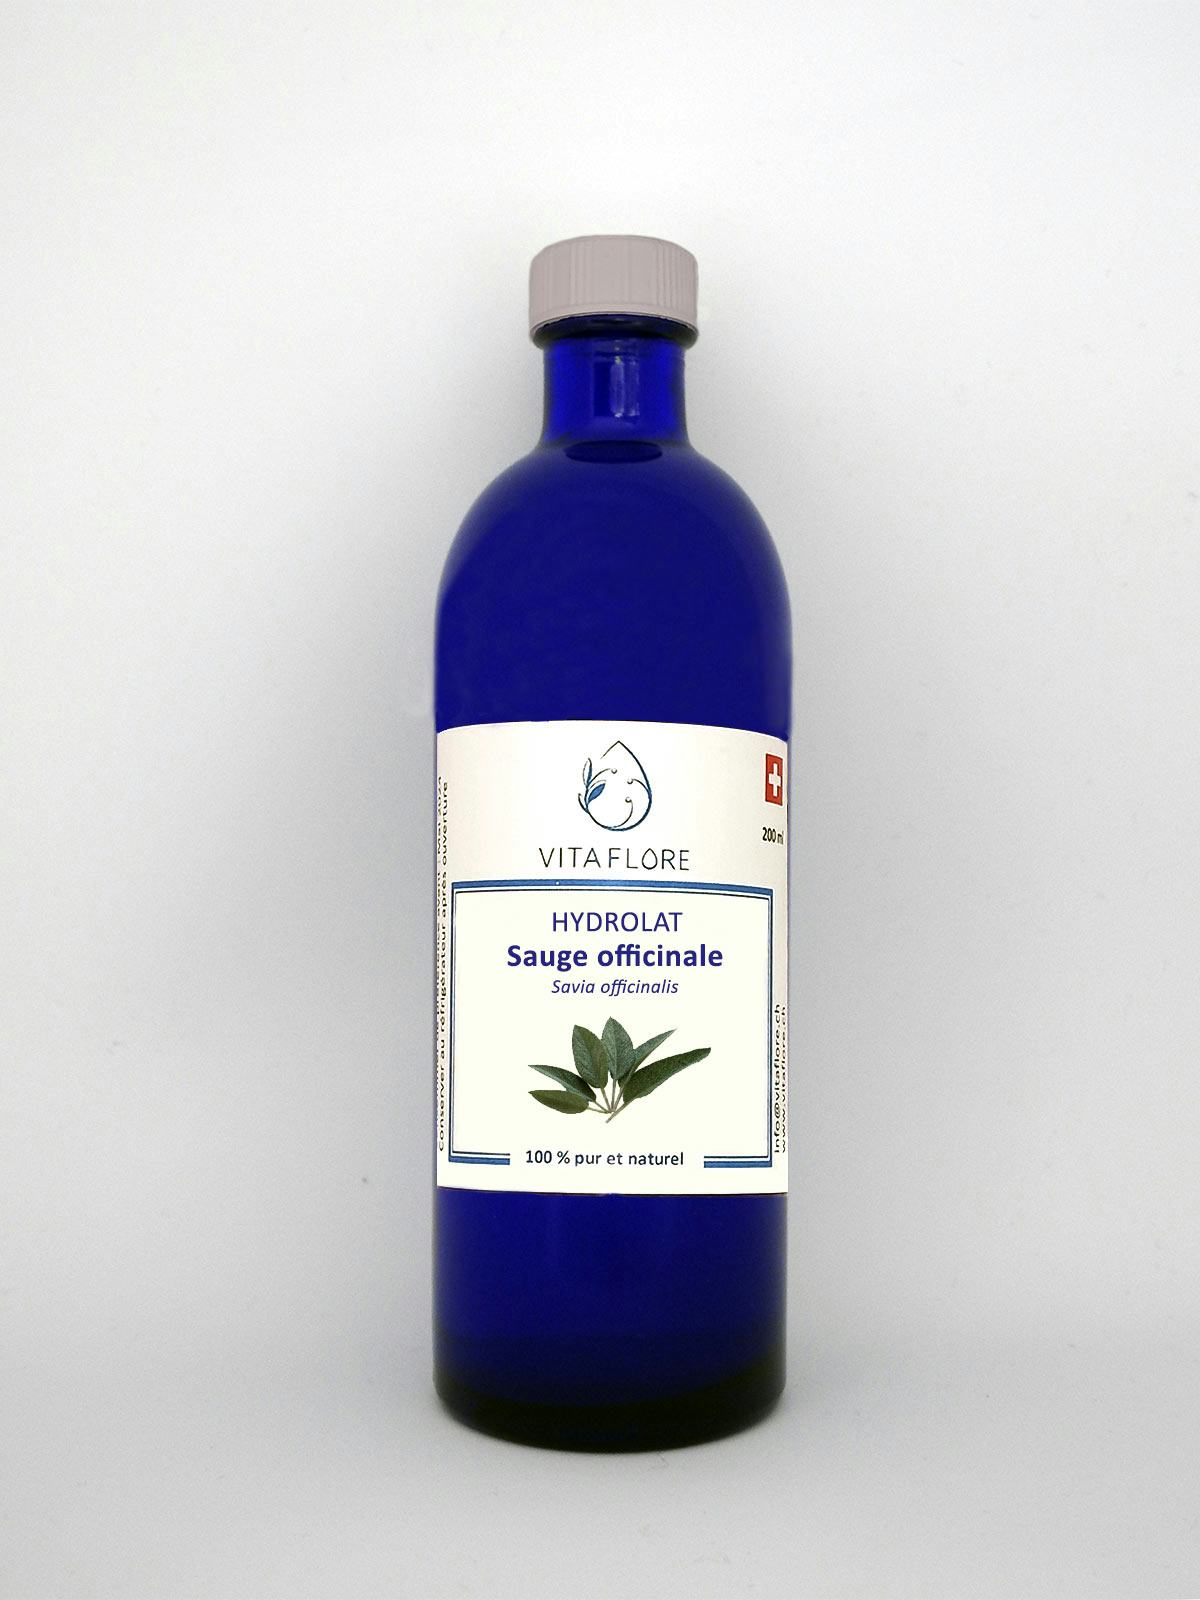 Hydrolat Sauge officinale, artisanal product for direct sale in Switzerland